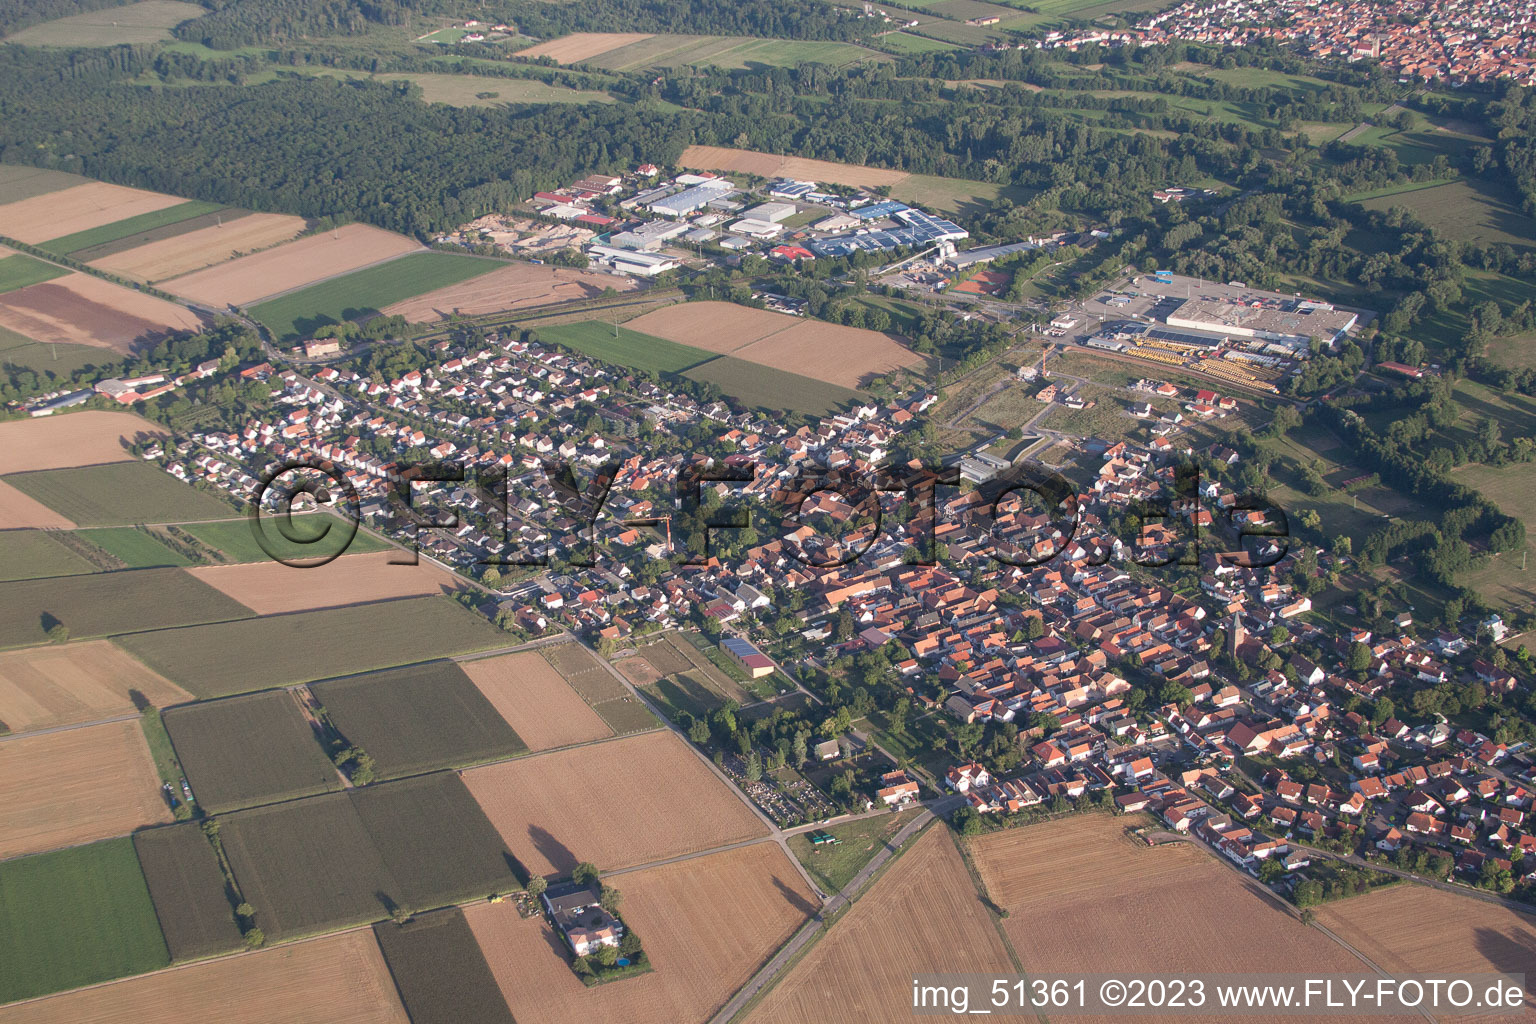 Aerial photograpy of Rohrbach in the state Rhineland-Palatinate, Germany